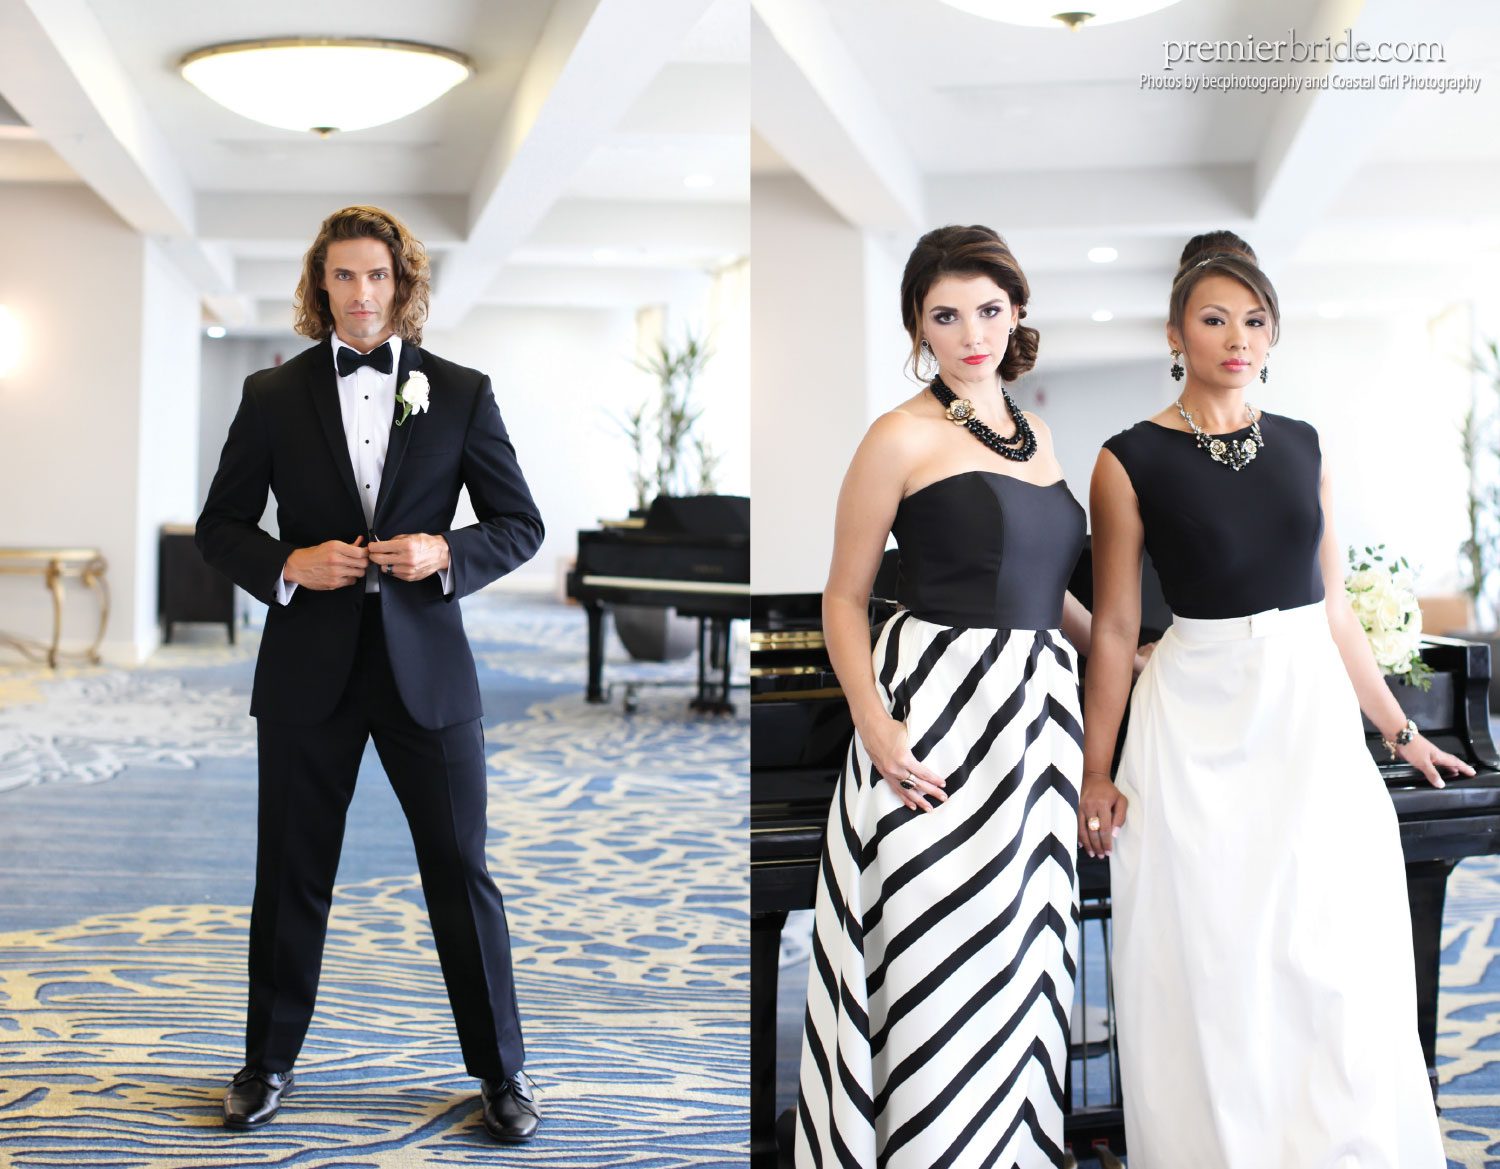 Michaels Formalwear & Bridal, Black Tie Formals, photos by becphotography